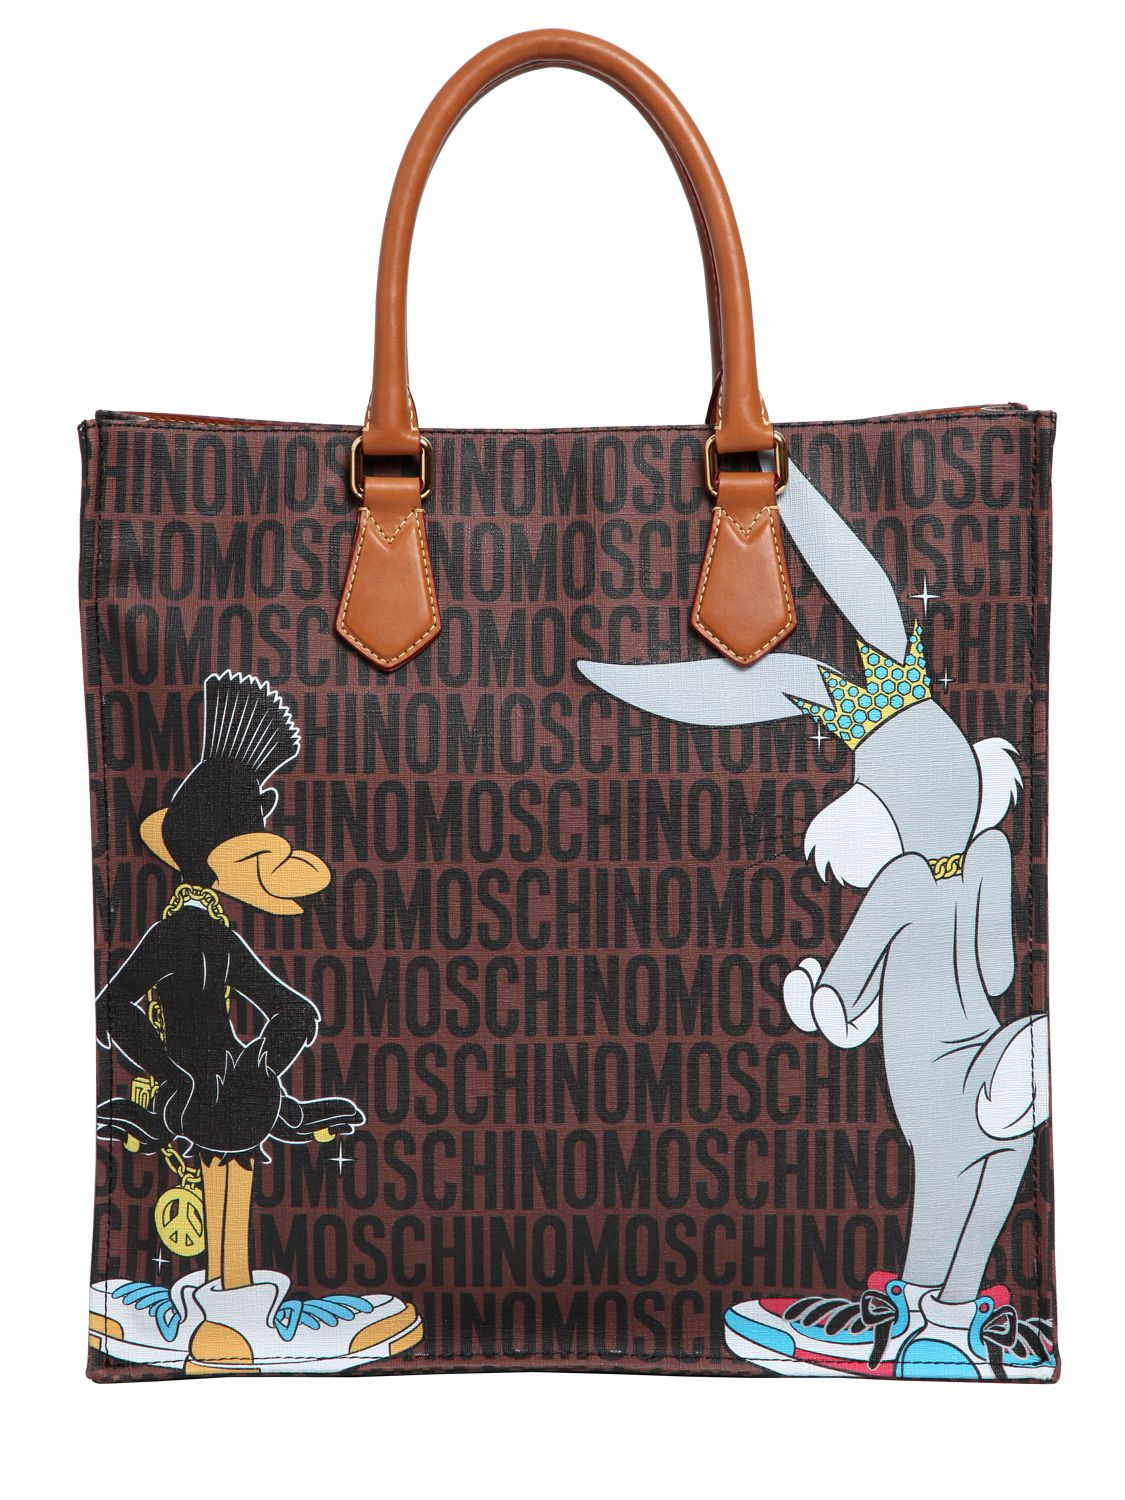 Moschino Looney Tunes Print Faux Leather Tote Bag in Brown - Lyst